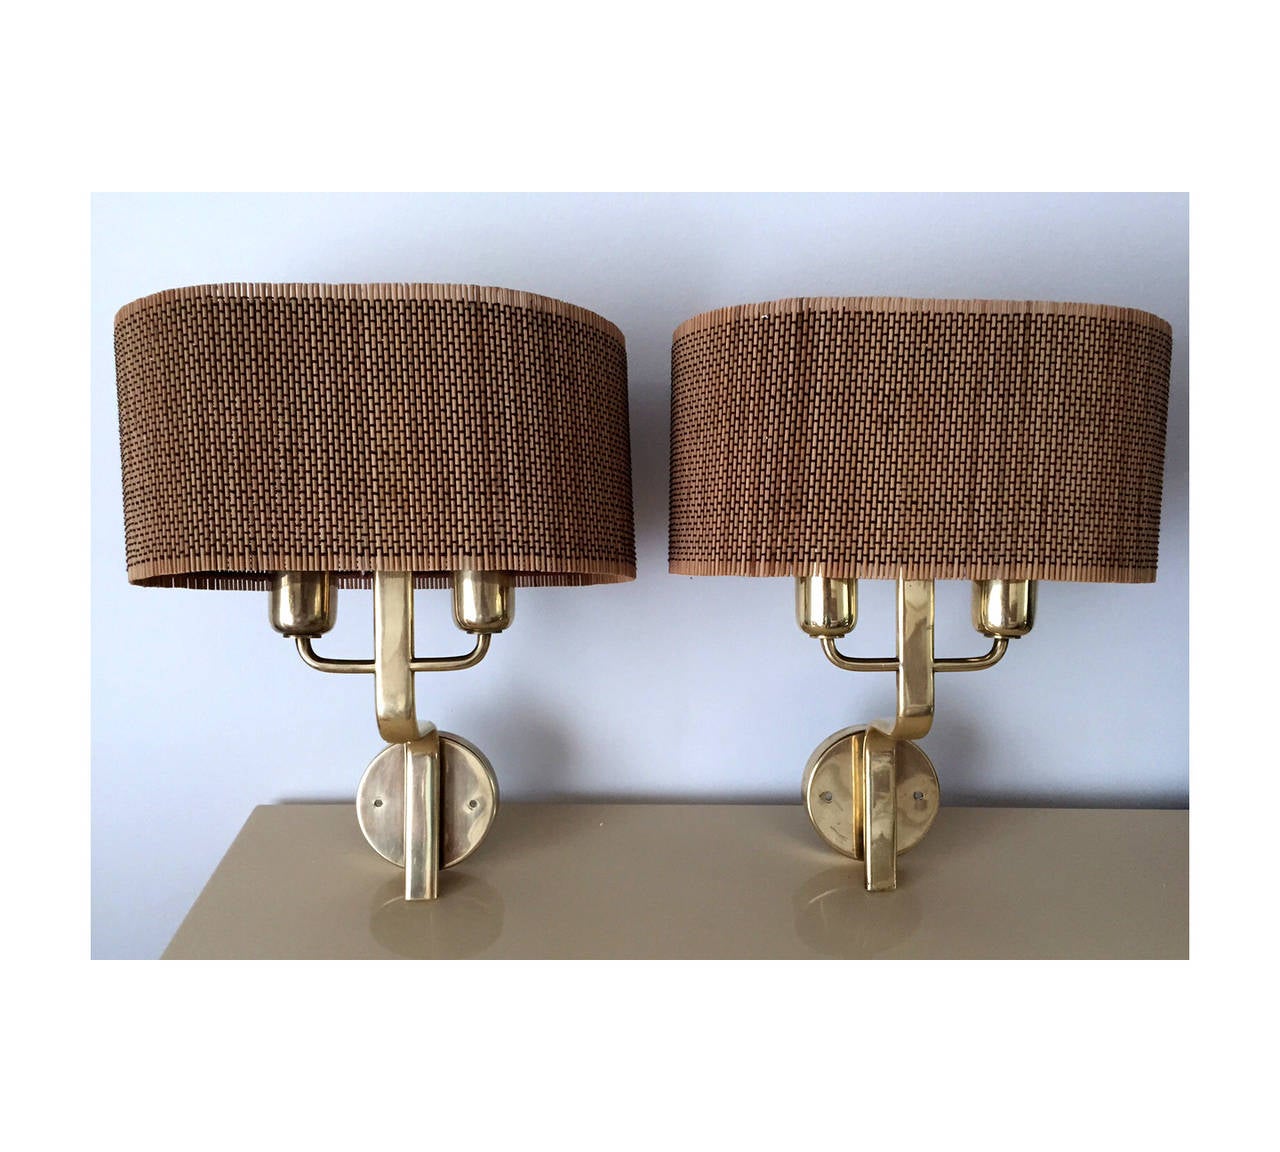 A pair of rare and early wall sconces designed by Paavo Tynell (1890-1973) for Taito Oy, circa 1940s. Made of brass with two lights and fitted with original woven rattan shades and filial plates. Ed. Taito Oy and branded on both sconces, Taito A,